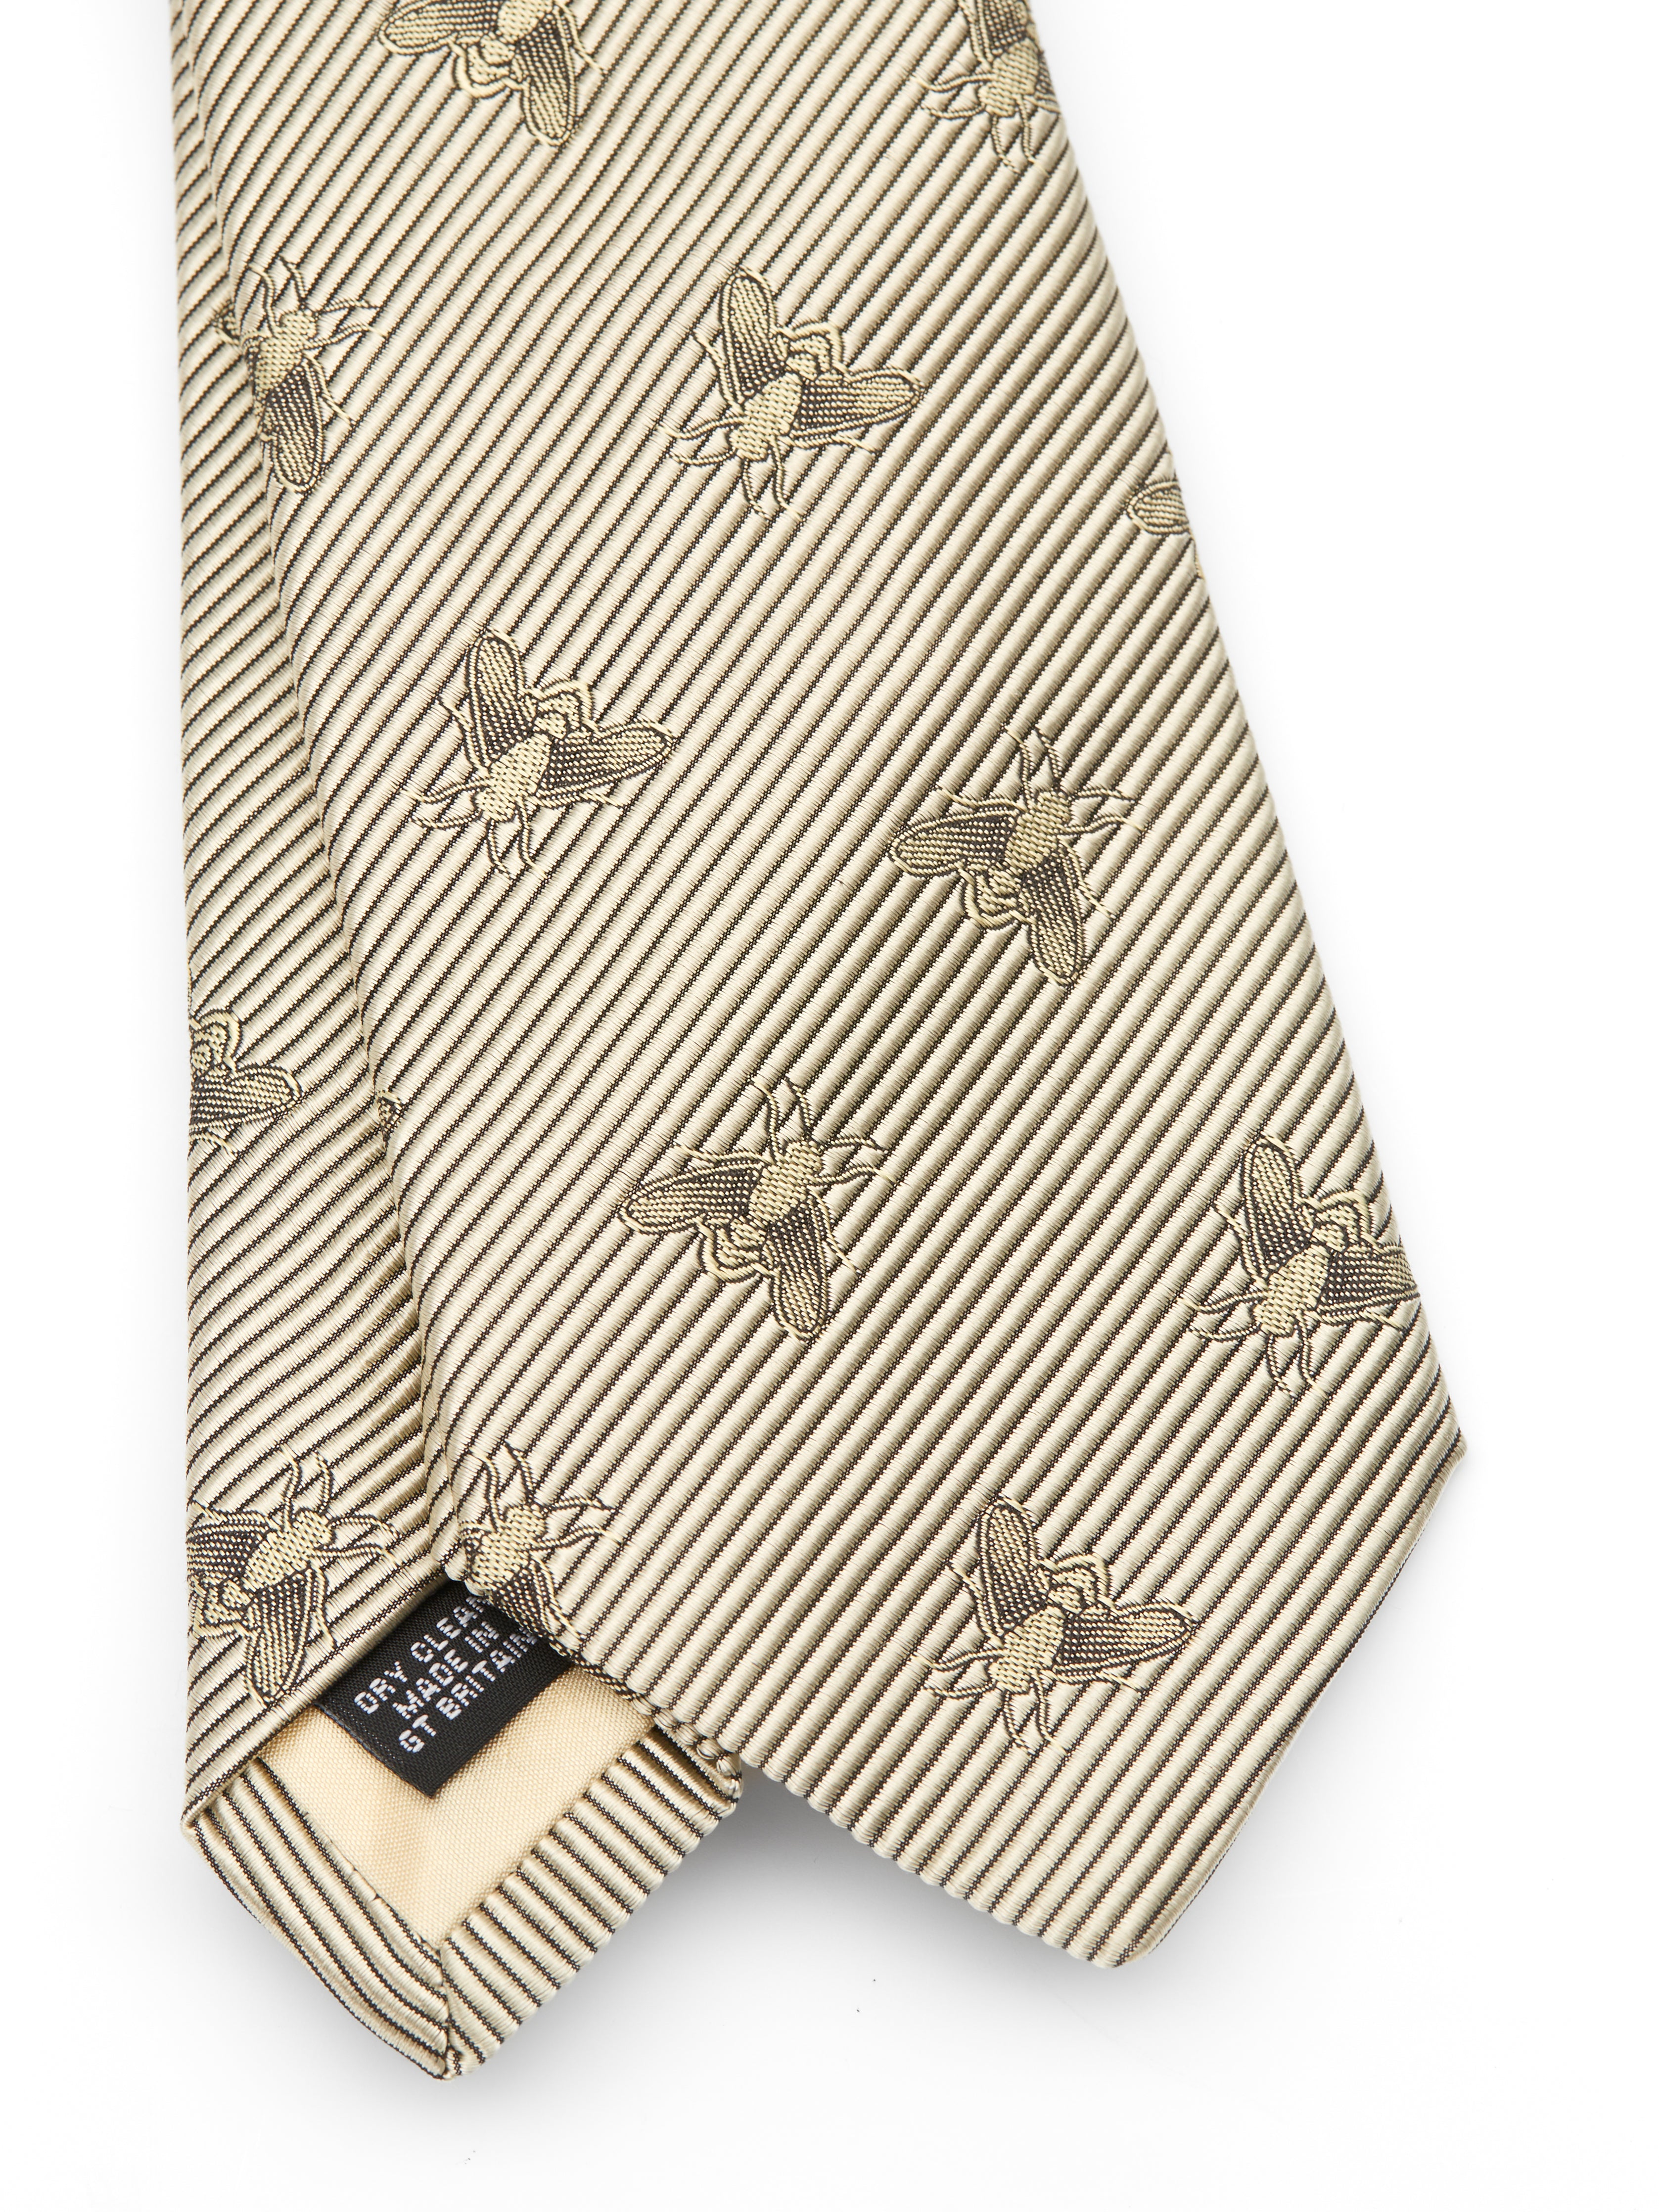 Champagne Bees Silk Tie